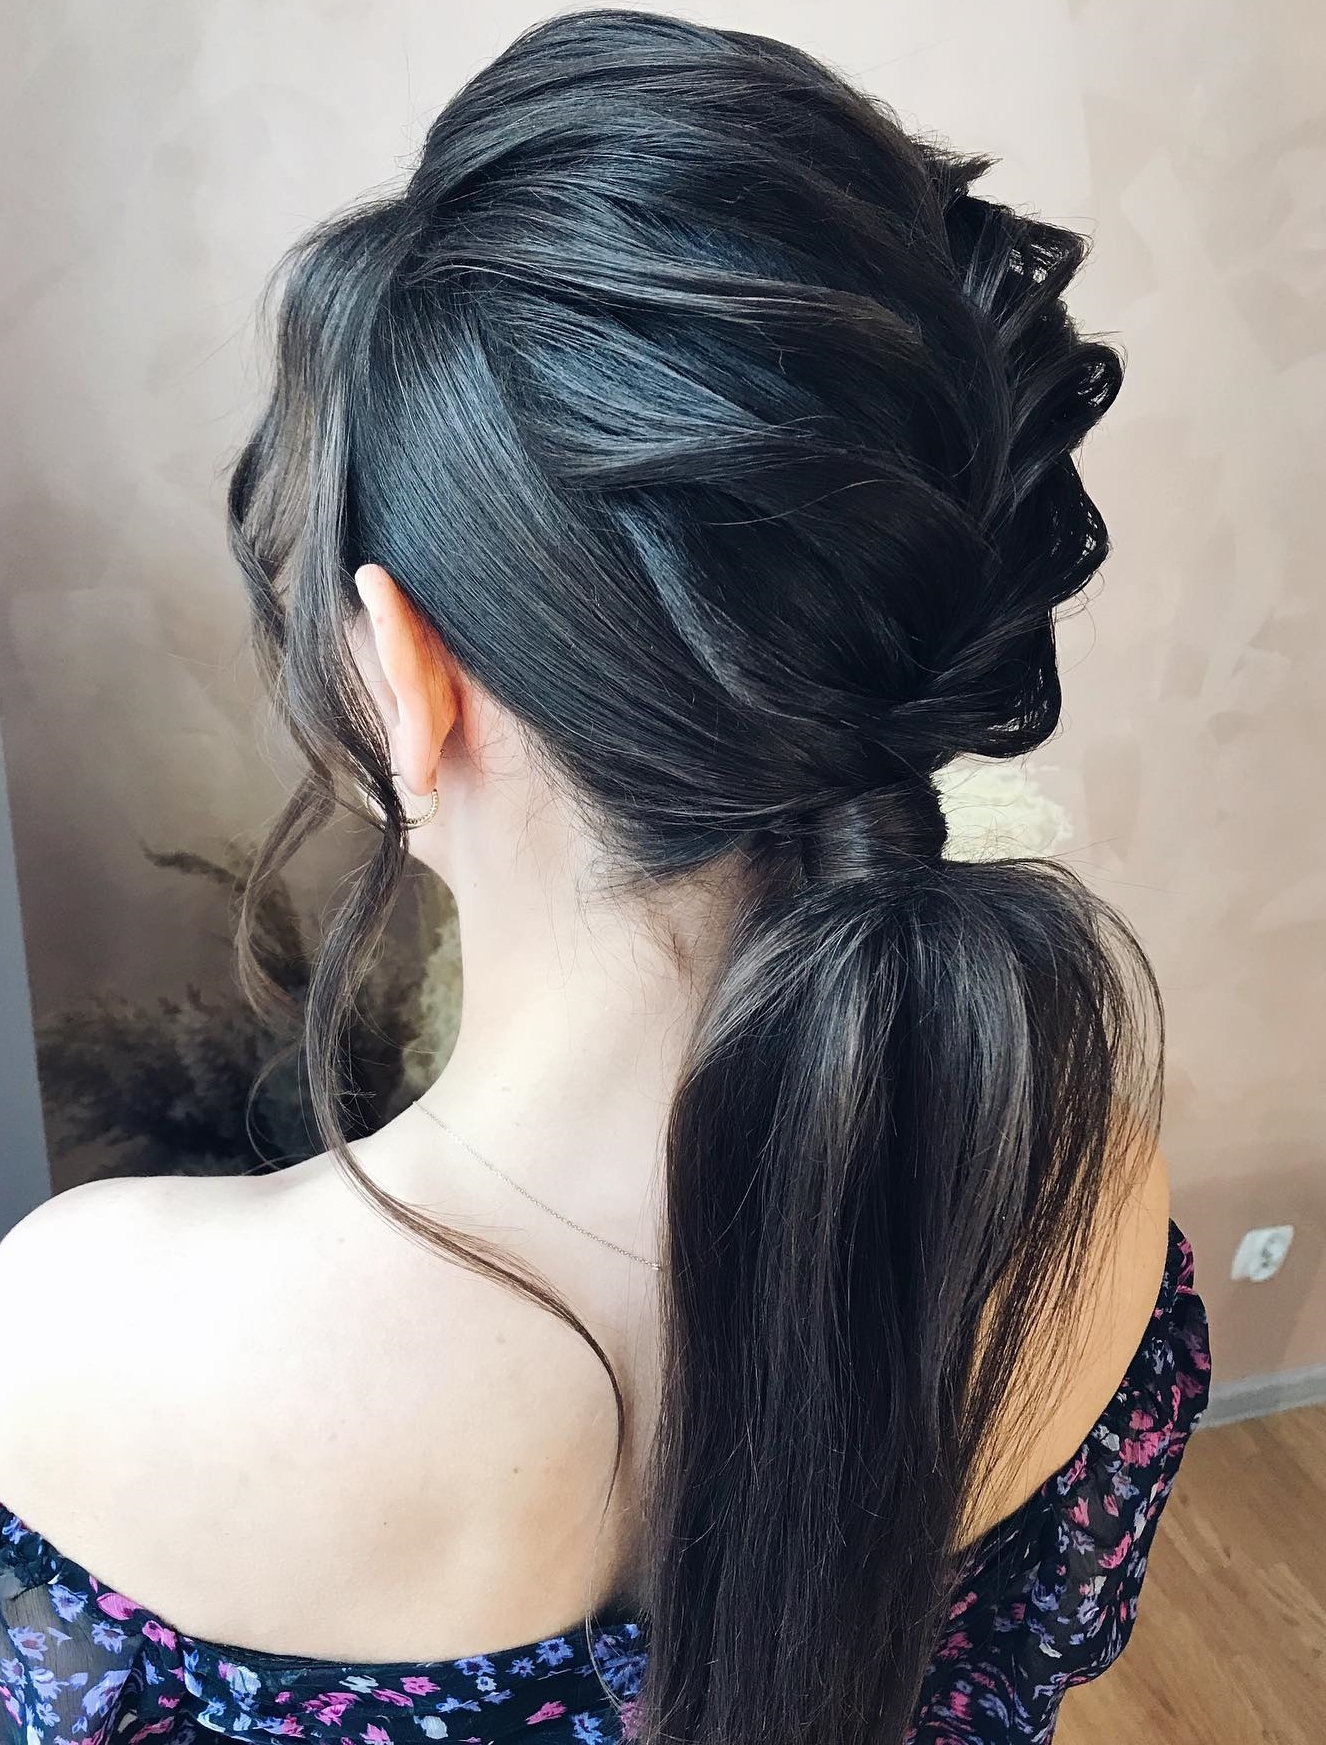 31 Easy Ponytail Hairstyles to Try At Home | IPSY